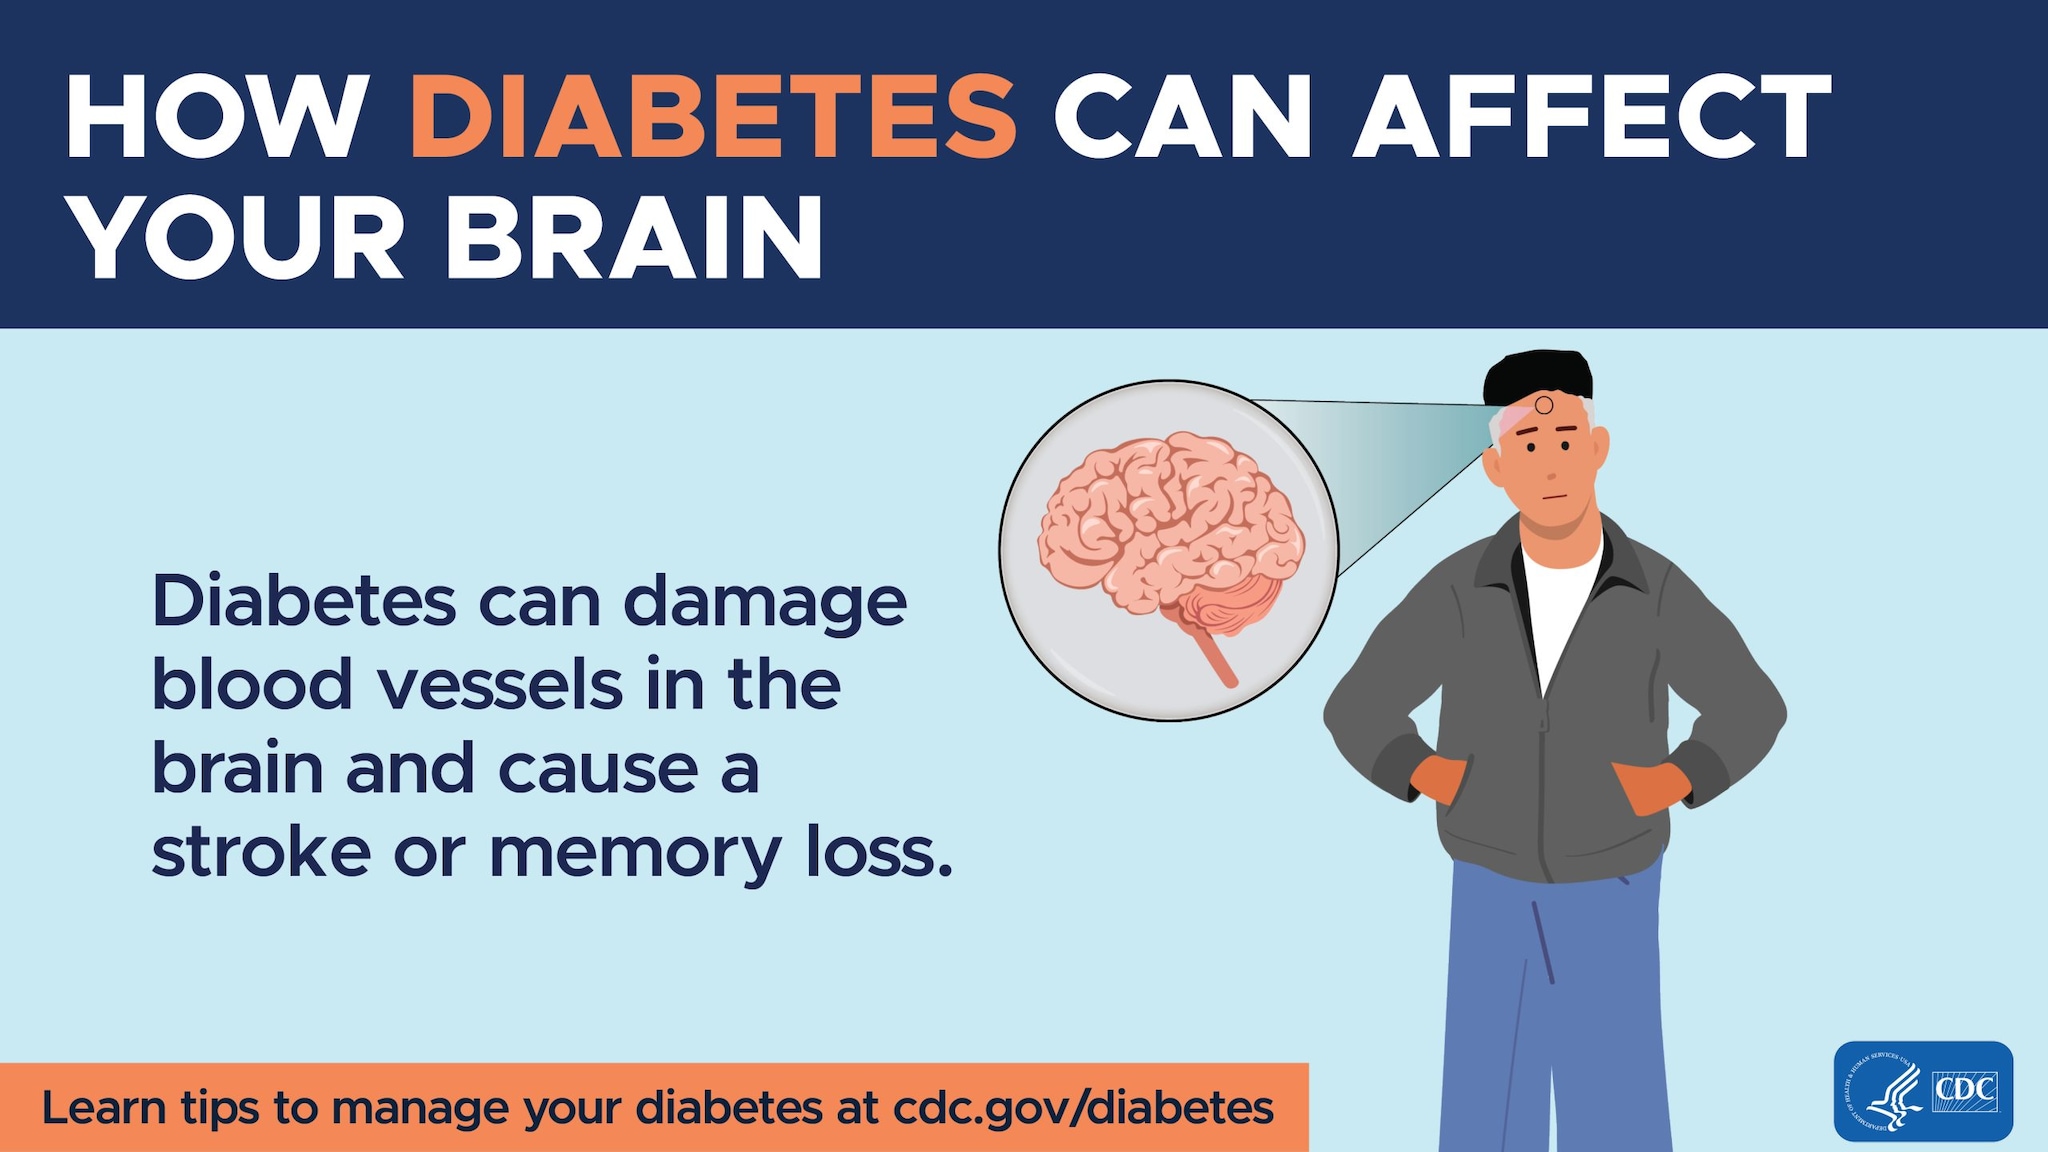 Diabetes can damage blood vessels in the brain and cause a stroke or memory loss.